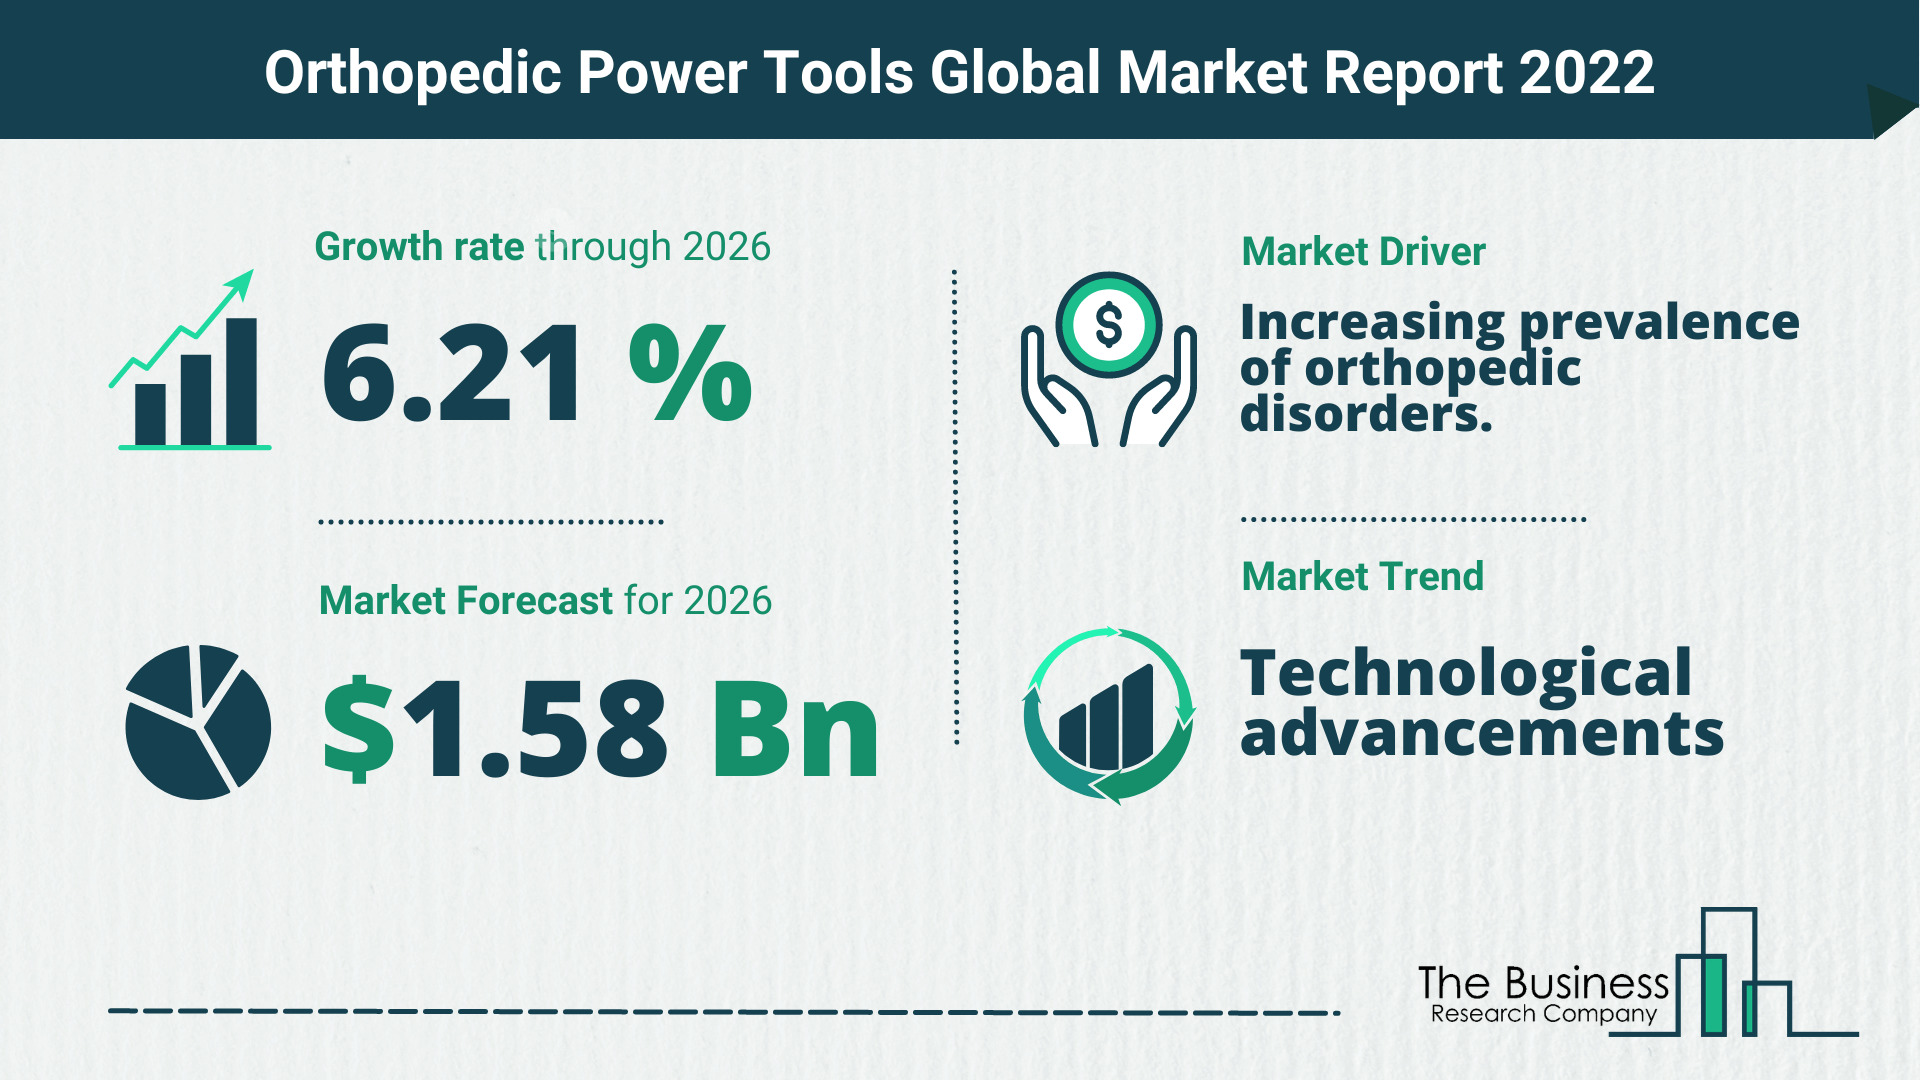 What Is The Orthopedic Power Tools Market Overview In 2022?